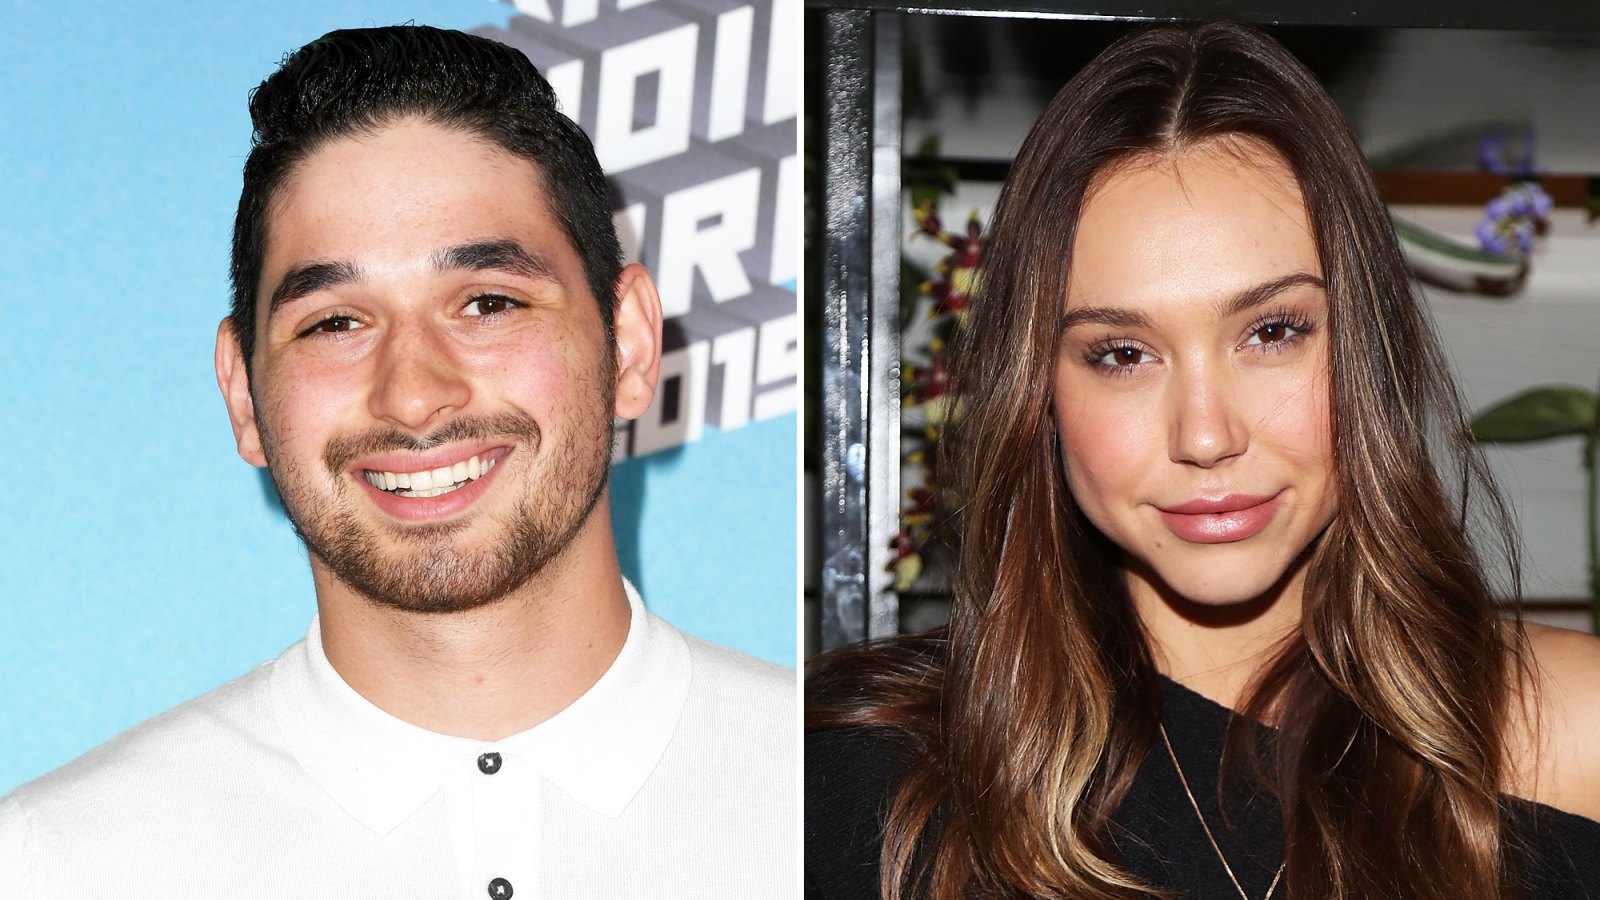 Alan Bersten Thinks Alexis Ren ‘Is a Beautiful Person,’ But Their Relationship ‘Didn’t End Up So Well’